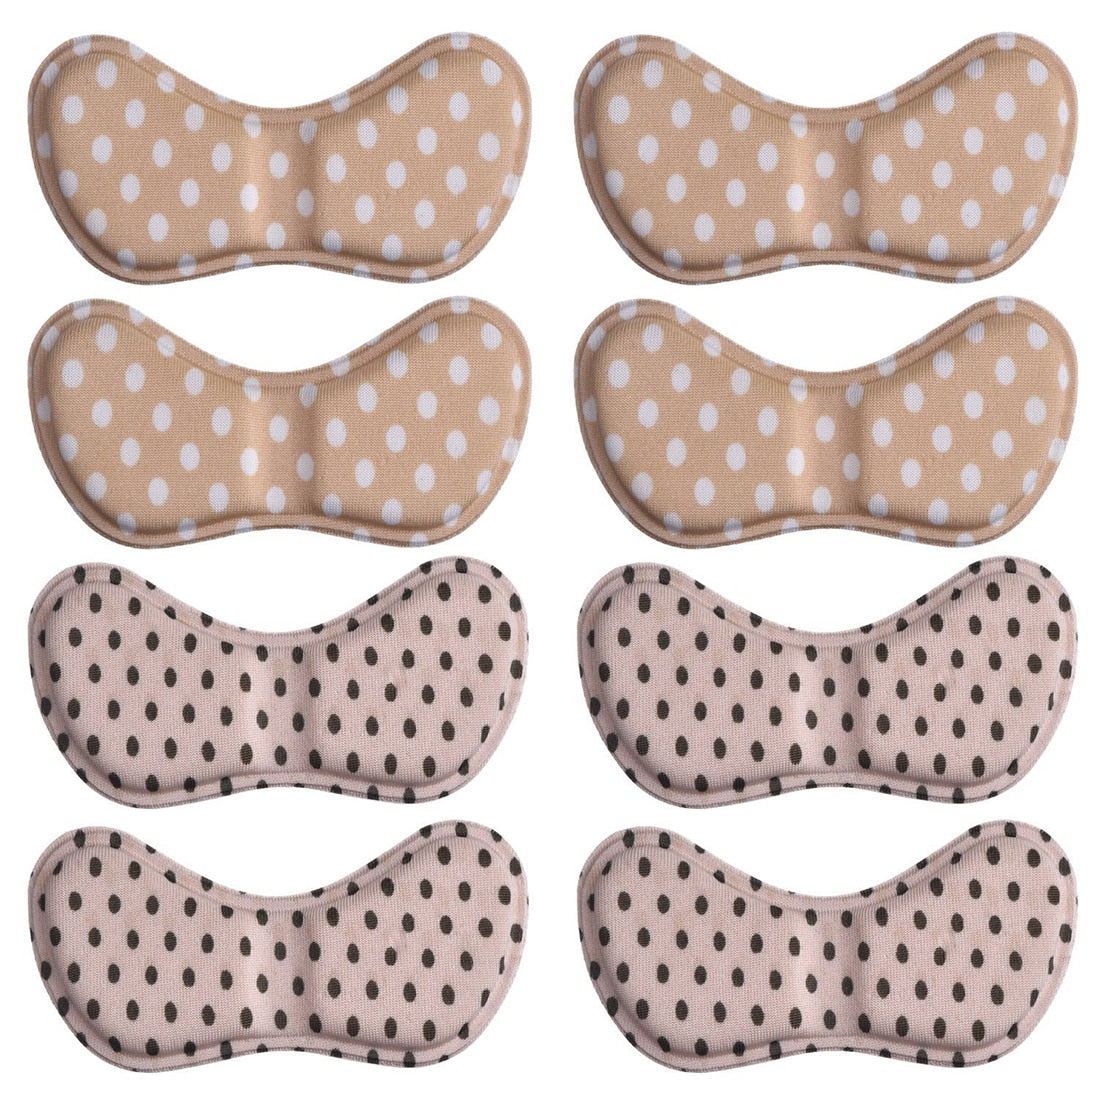 Hot-4 Pairs Heel Stickers Heel Cushion Pads Shoe Heel Insoles for Improved Shoe Fit and Comfort Beige Color with Black and Whi - ebowsos